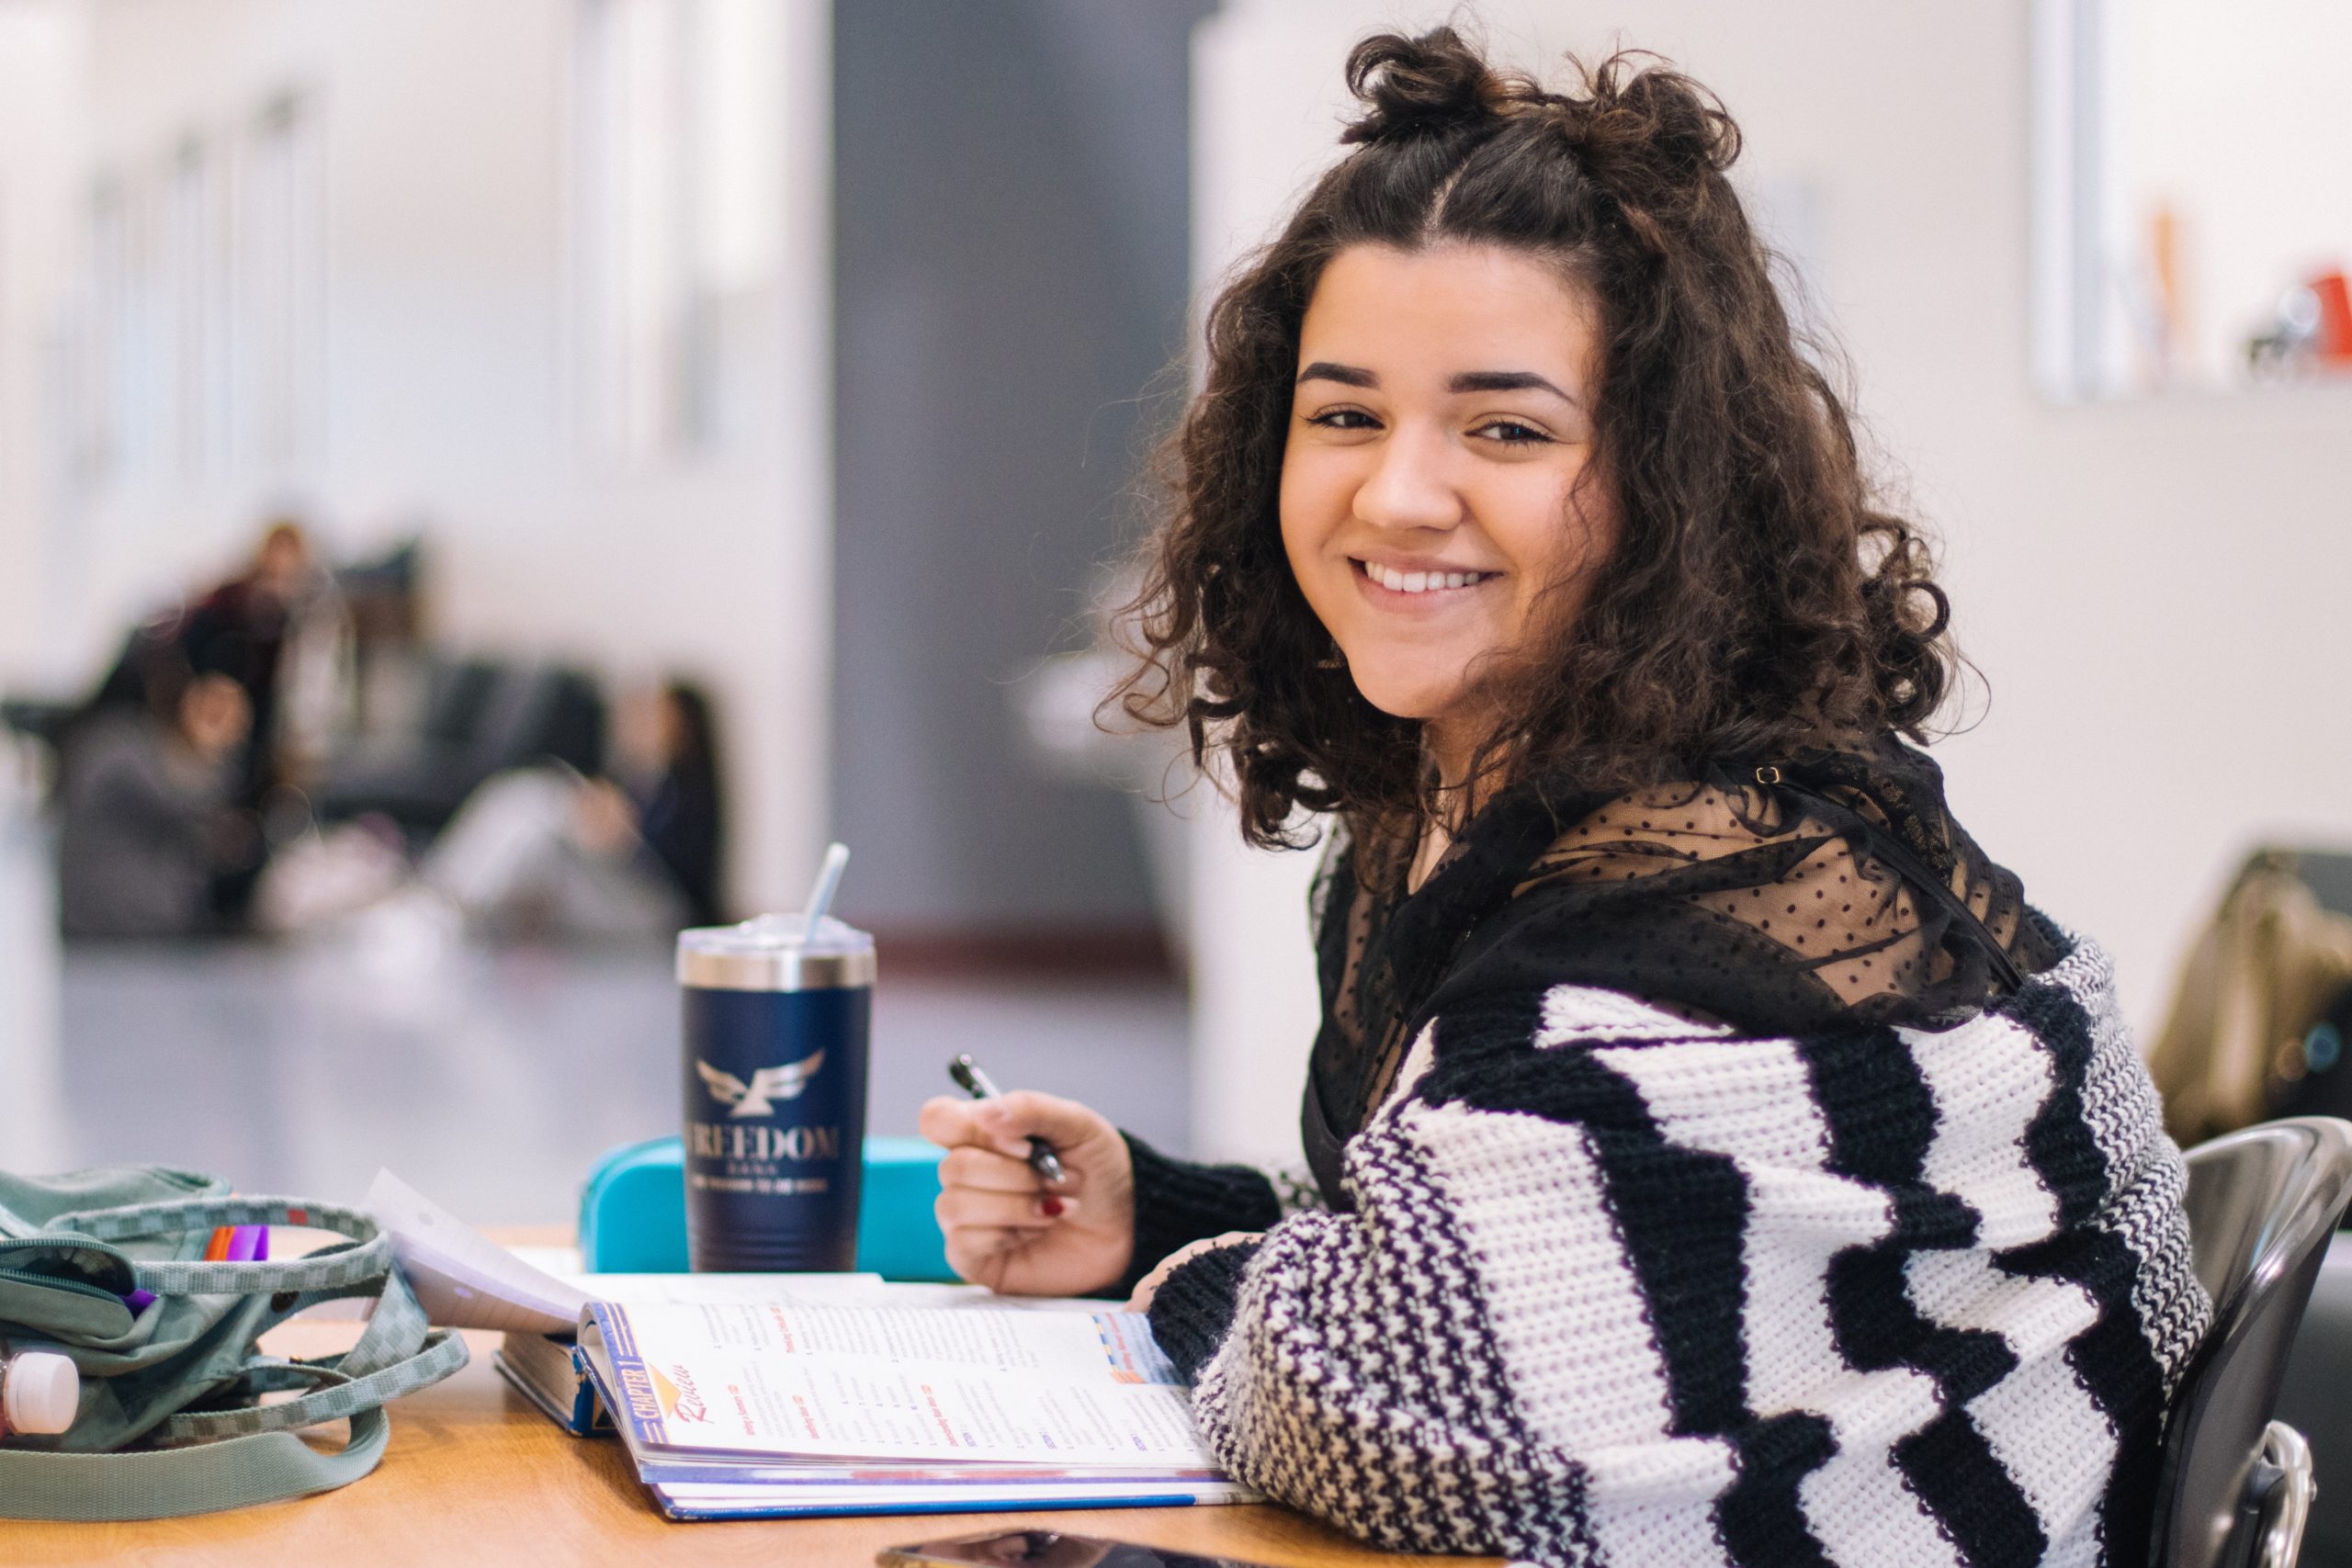 student smiling at desk with notebook